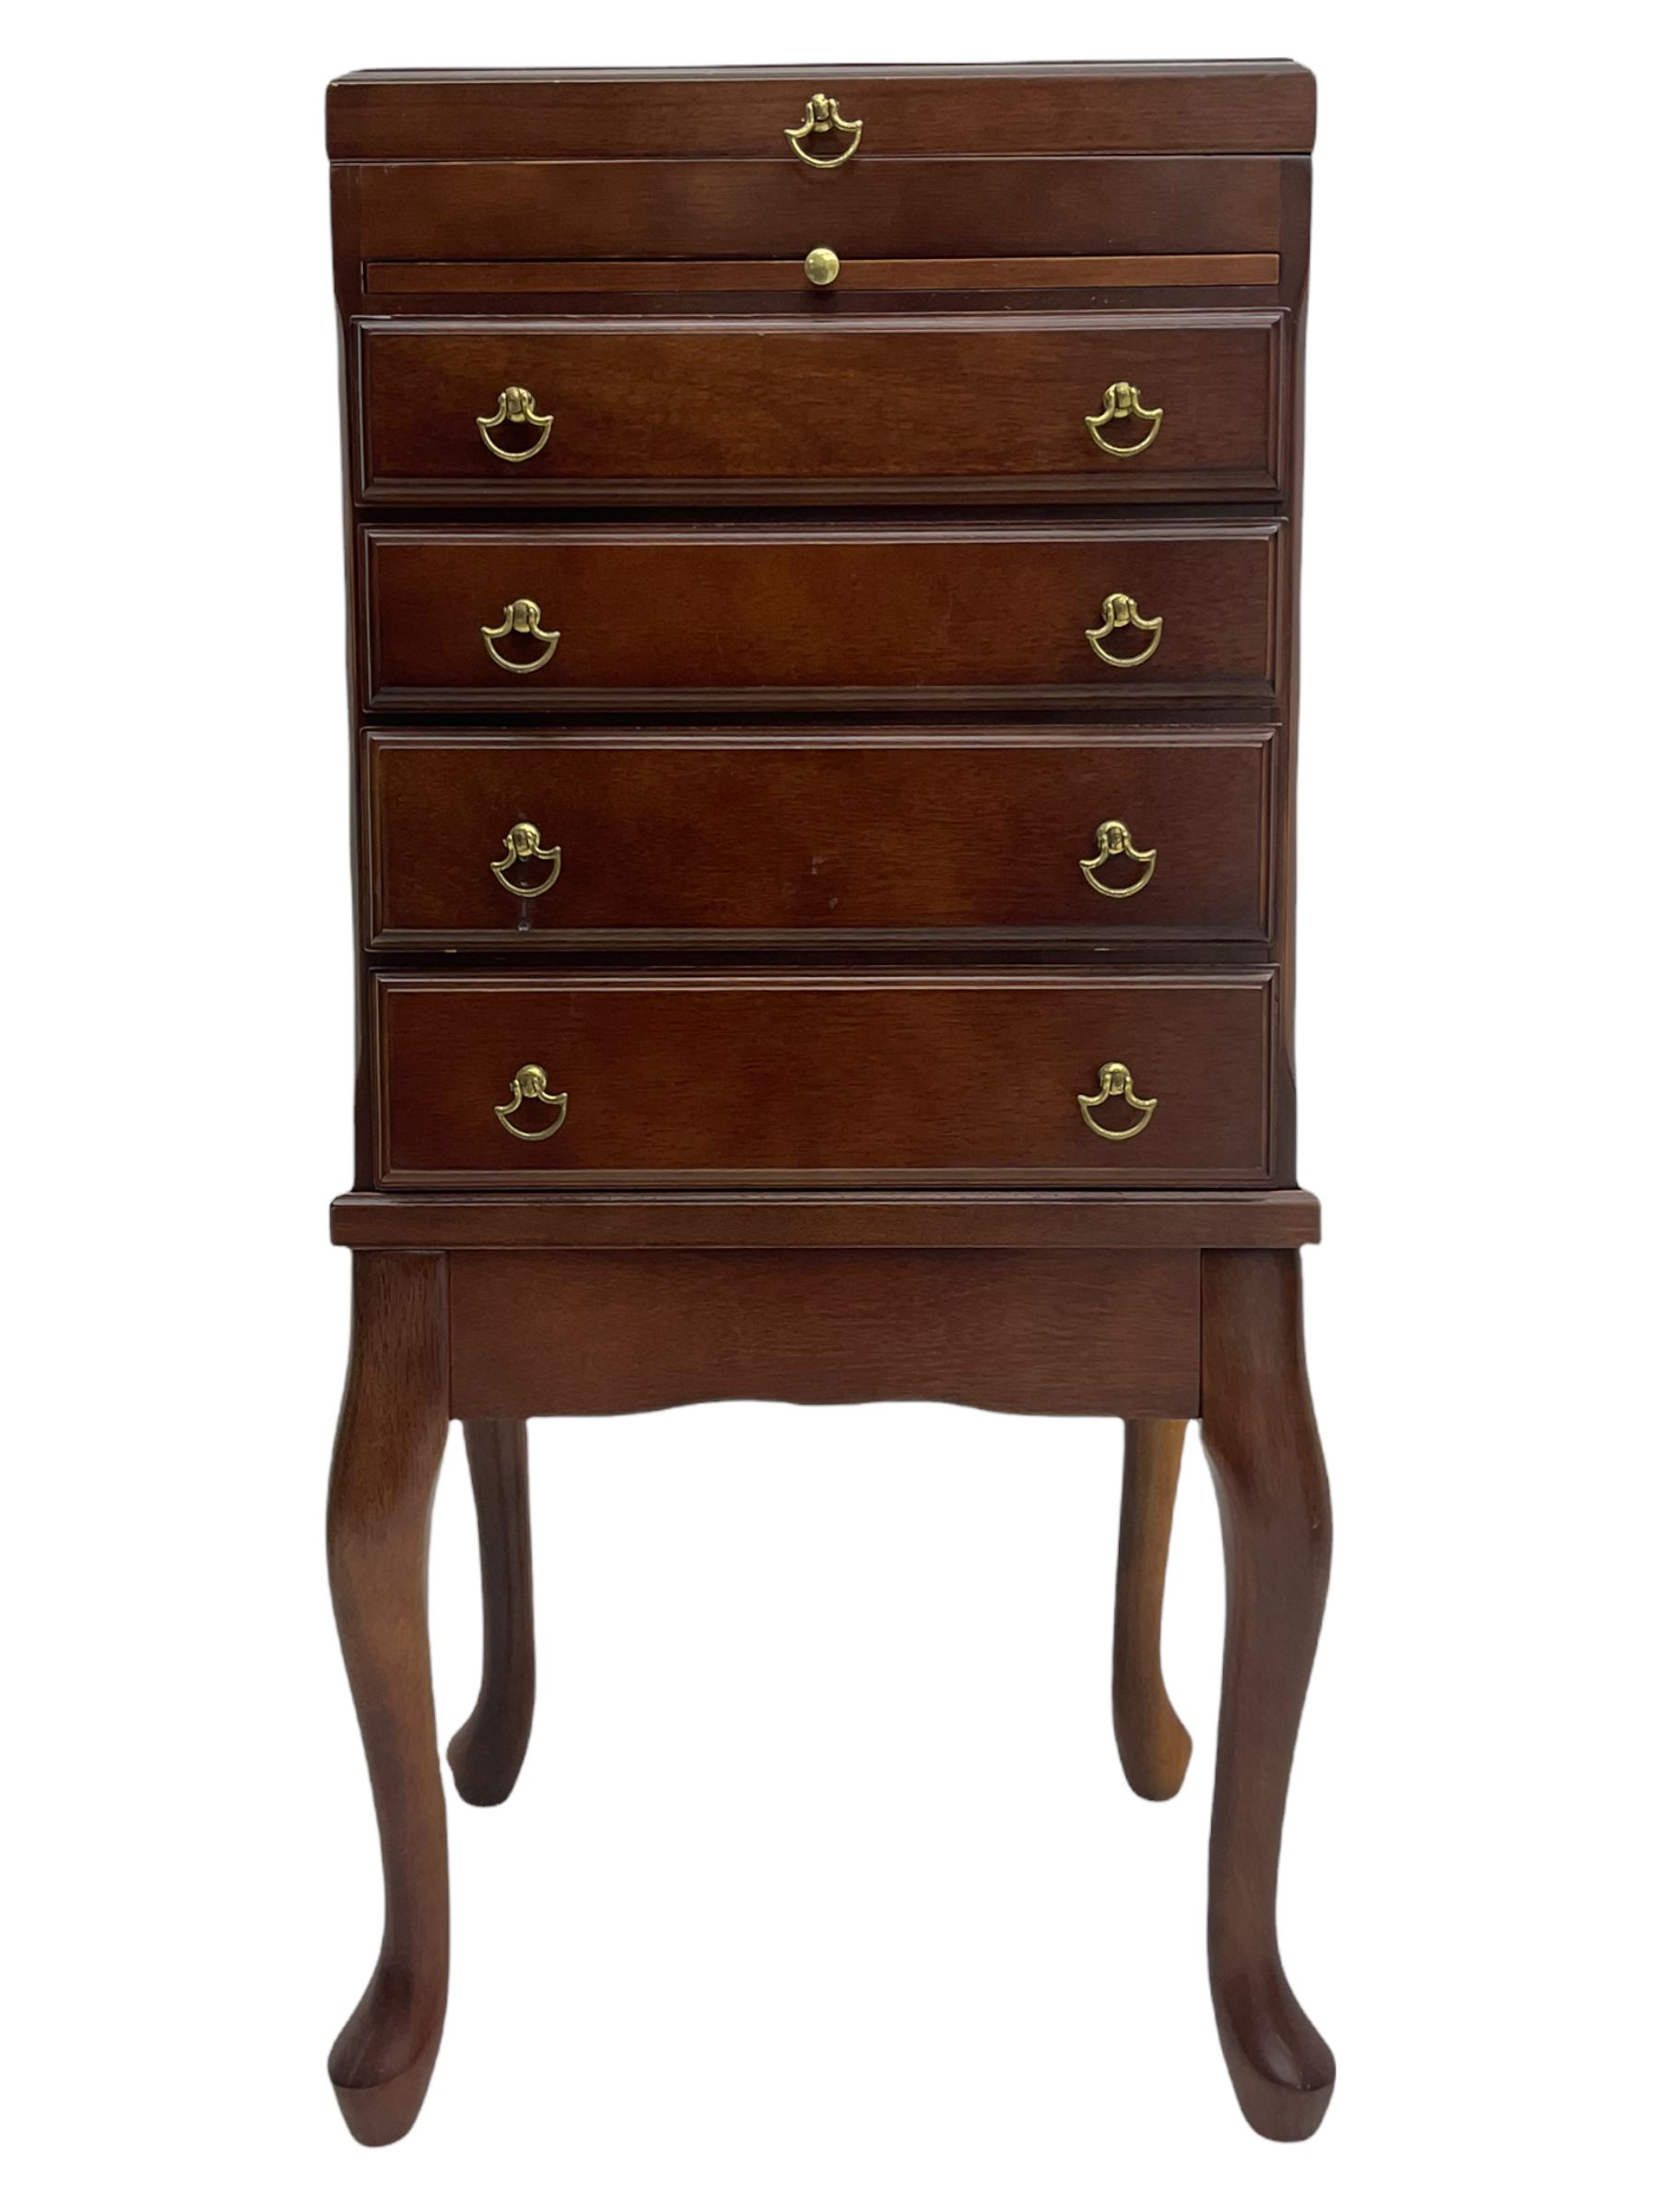 Mahogany pedestal chest on stand